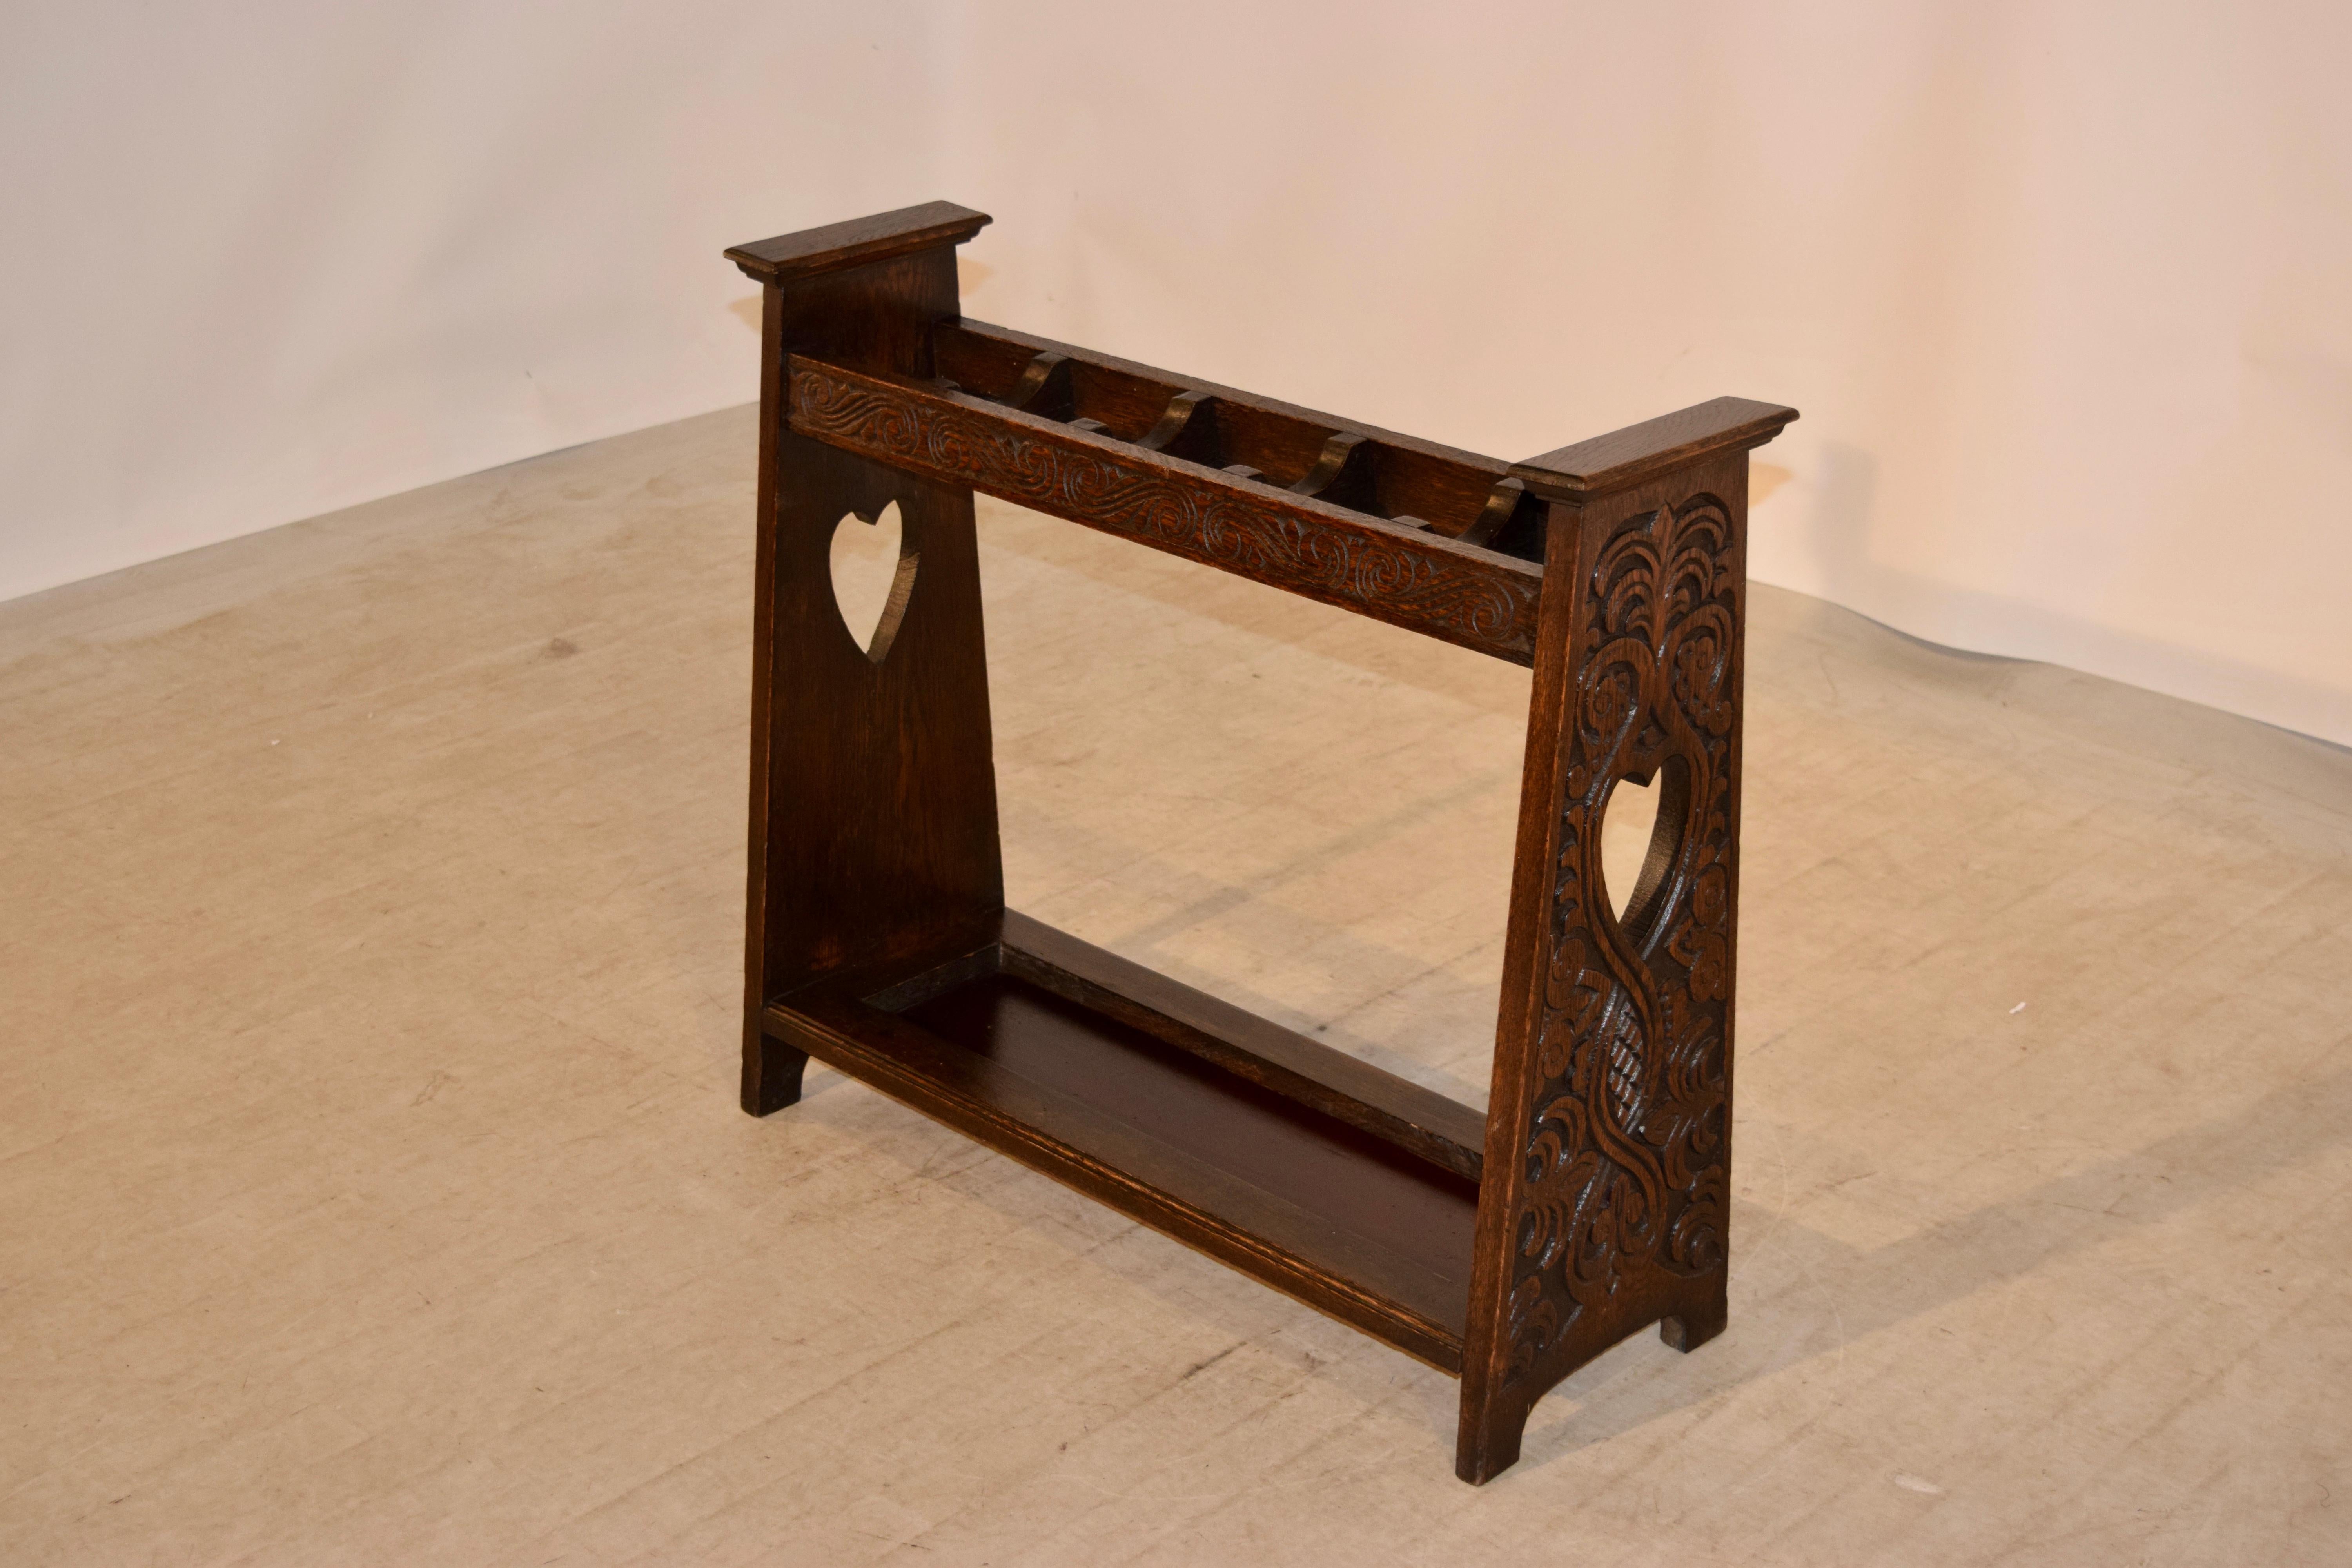 English oak cane stand in the Arts & Crafts style. The sides of the piece are heavily carved and have cutout heart shapes in the centers, circa 1920s. They are joined at the bottom by a single shelf with raised edges to keep the canes in the shelf.